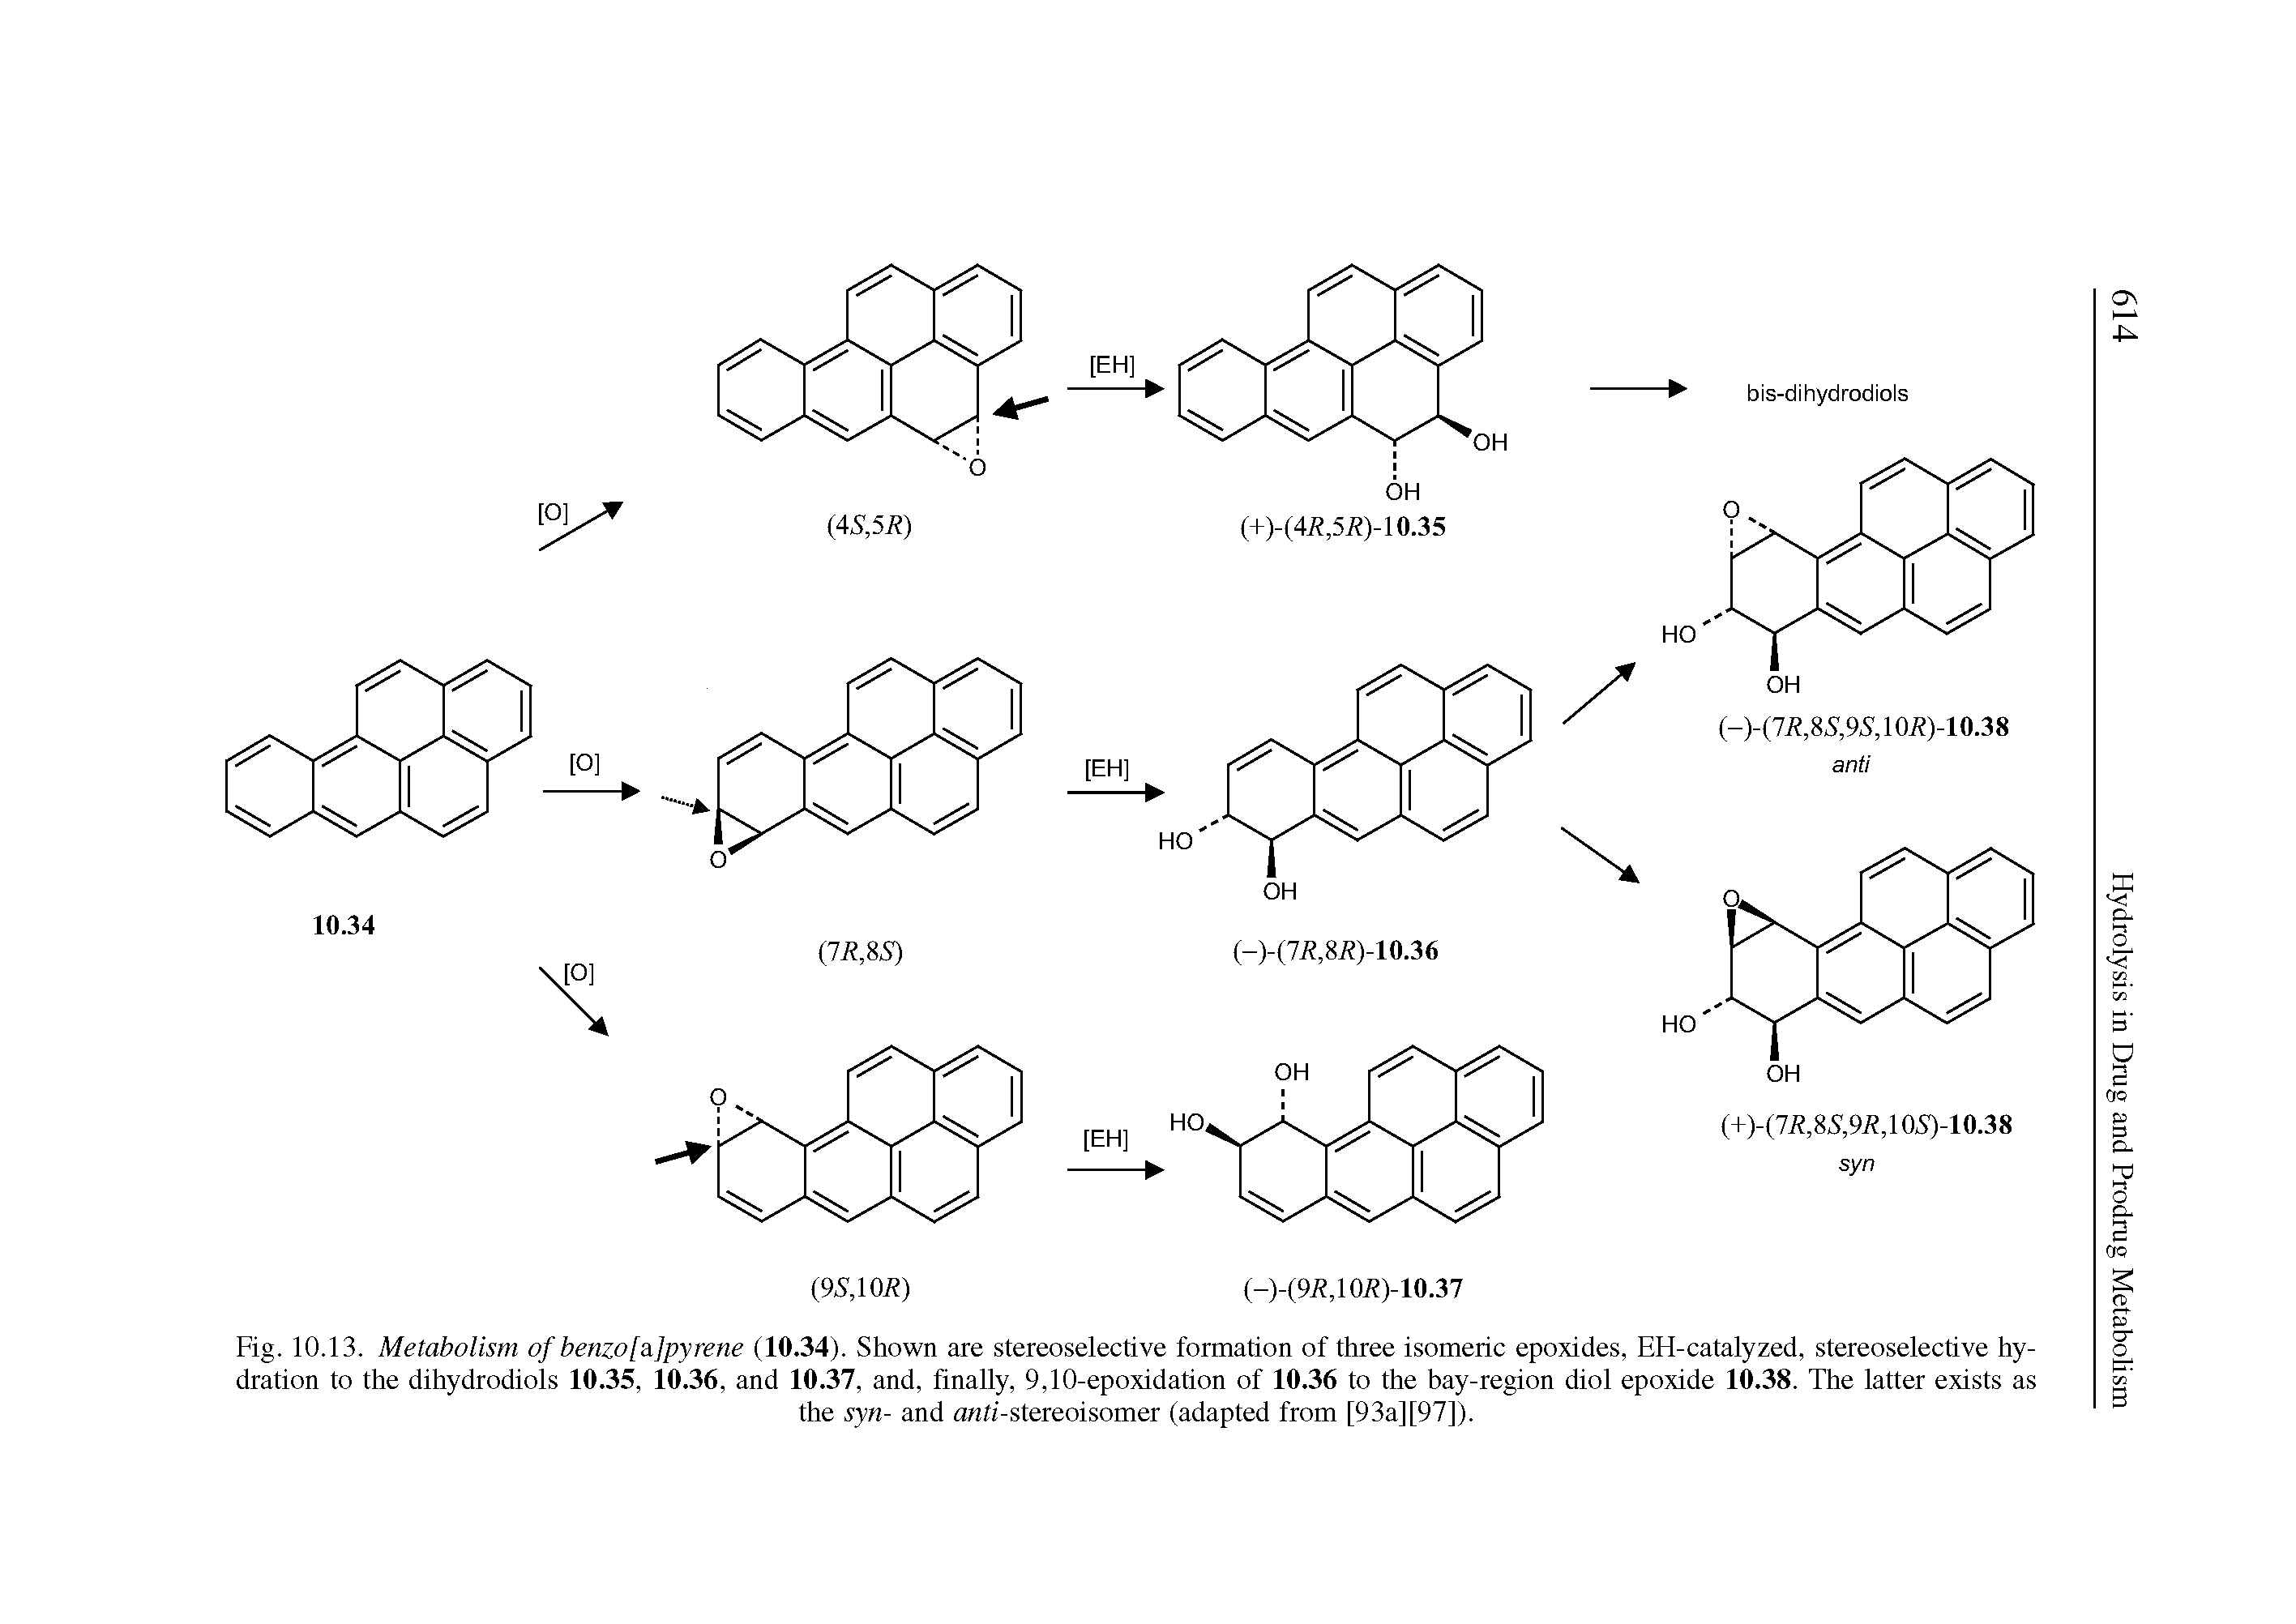 Fig. 10.13. Metabolism of benzo[ ]pyrene (10.34). Shown are stereoselective formation of three isomeric epoxides, EH-catalyzed, stereoselective hydration to the dihydrodiols 10.35, 10.36, and 10.37, and, finally, 9,10-epoxidation of 10.36 to the bay-region diol epoxide 10.38. The latter exists as...